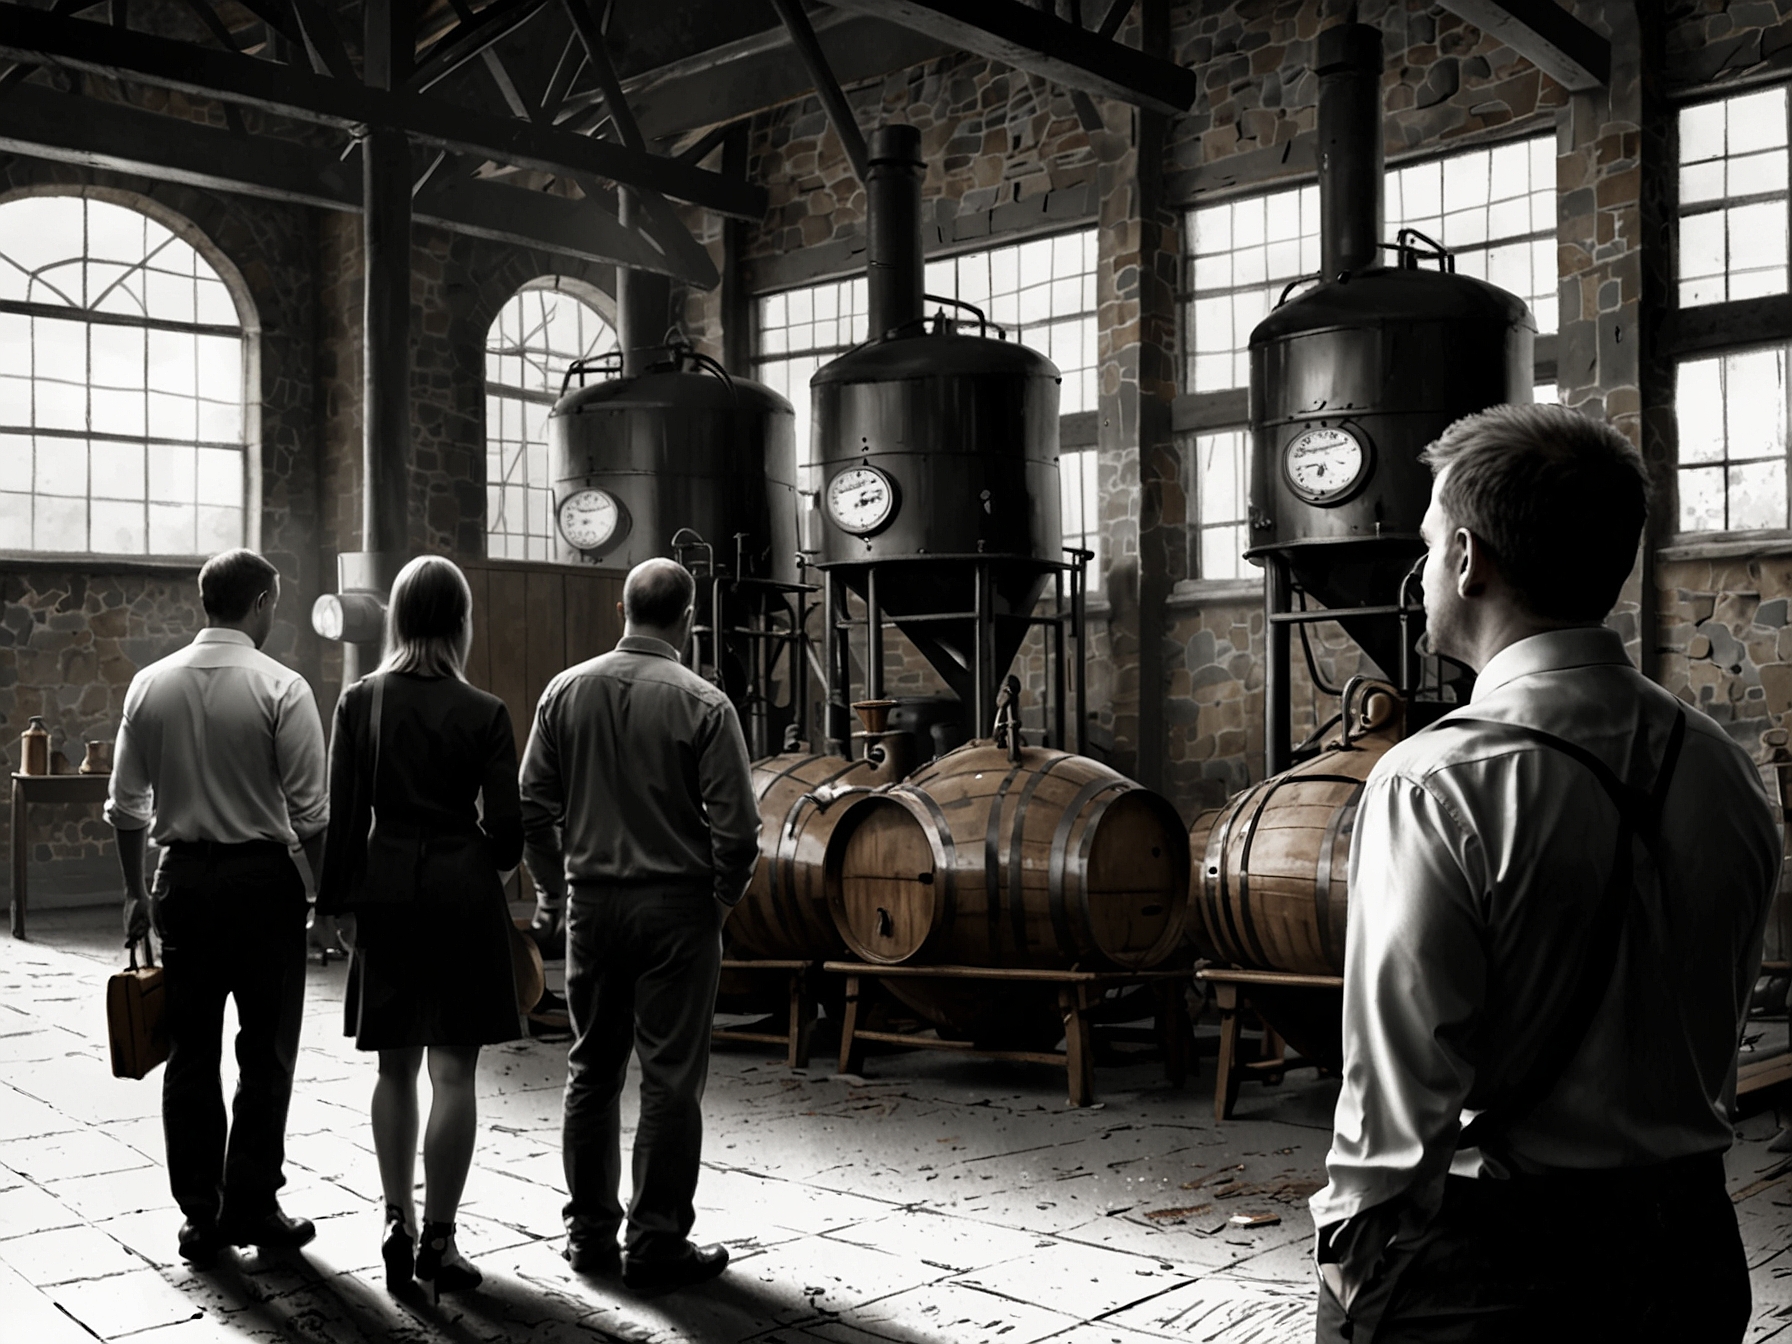 Image of visitors touring a distillery, showcasing the significant role of whisky tourism in boosting local economies and promoting Scotland's rich cultural heritage.